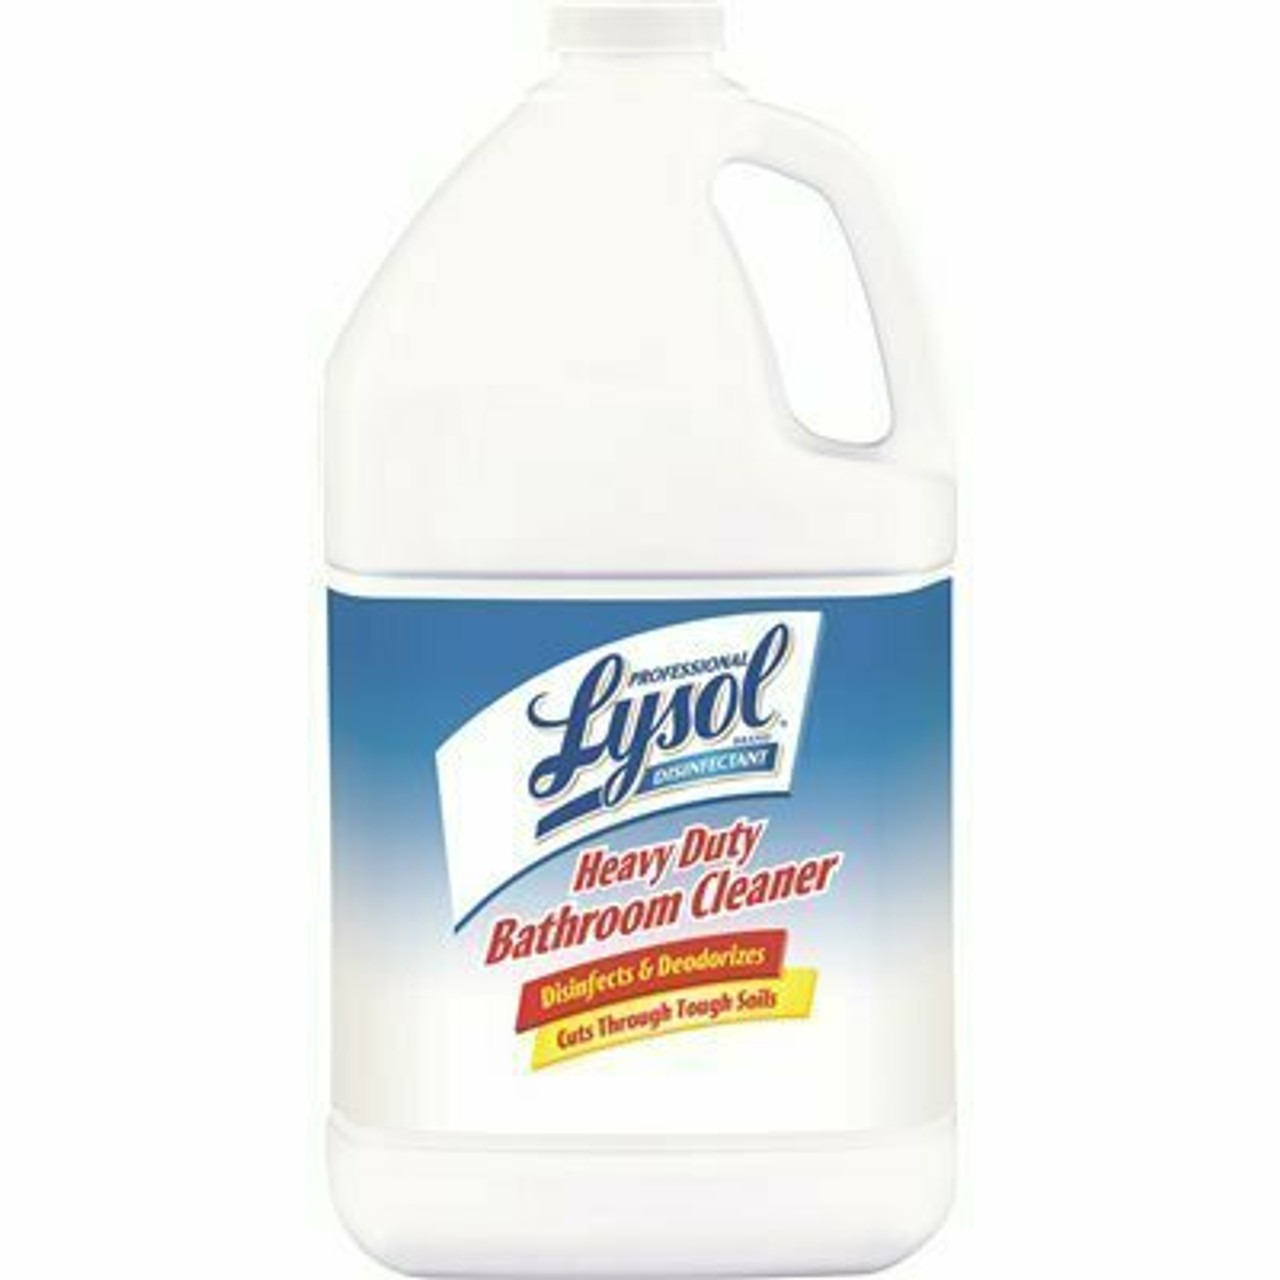 Professional Lysol Disinfectant Heavy-Duty 1 Gal. Bottle Bathroom Cleaner Fresh Lime Scent Liquid